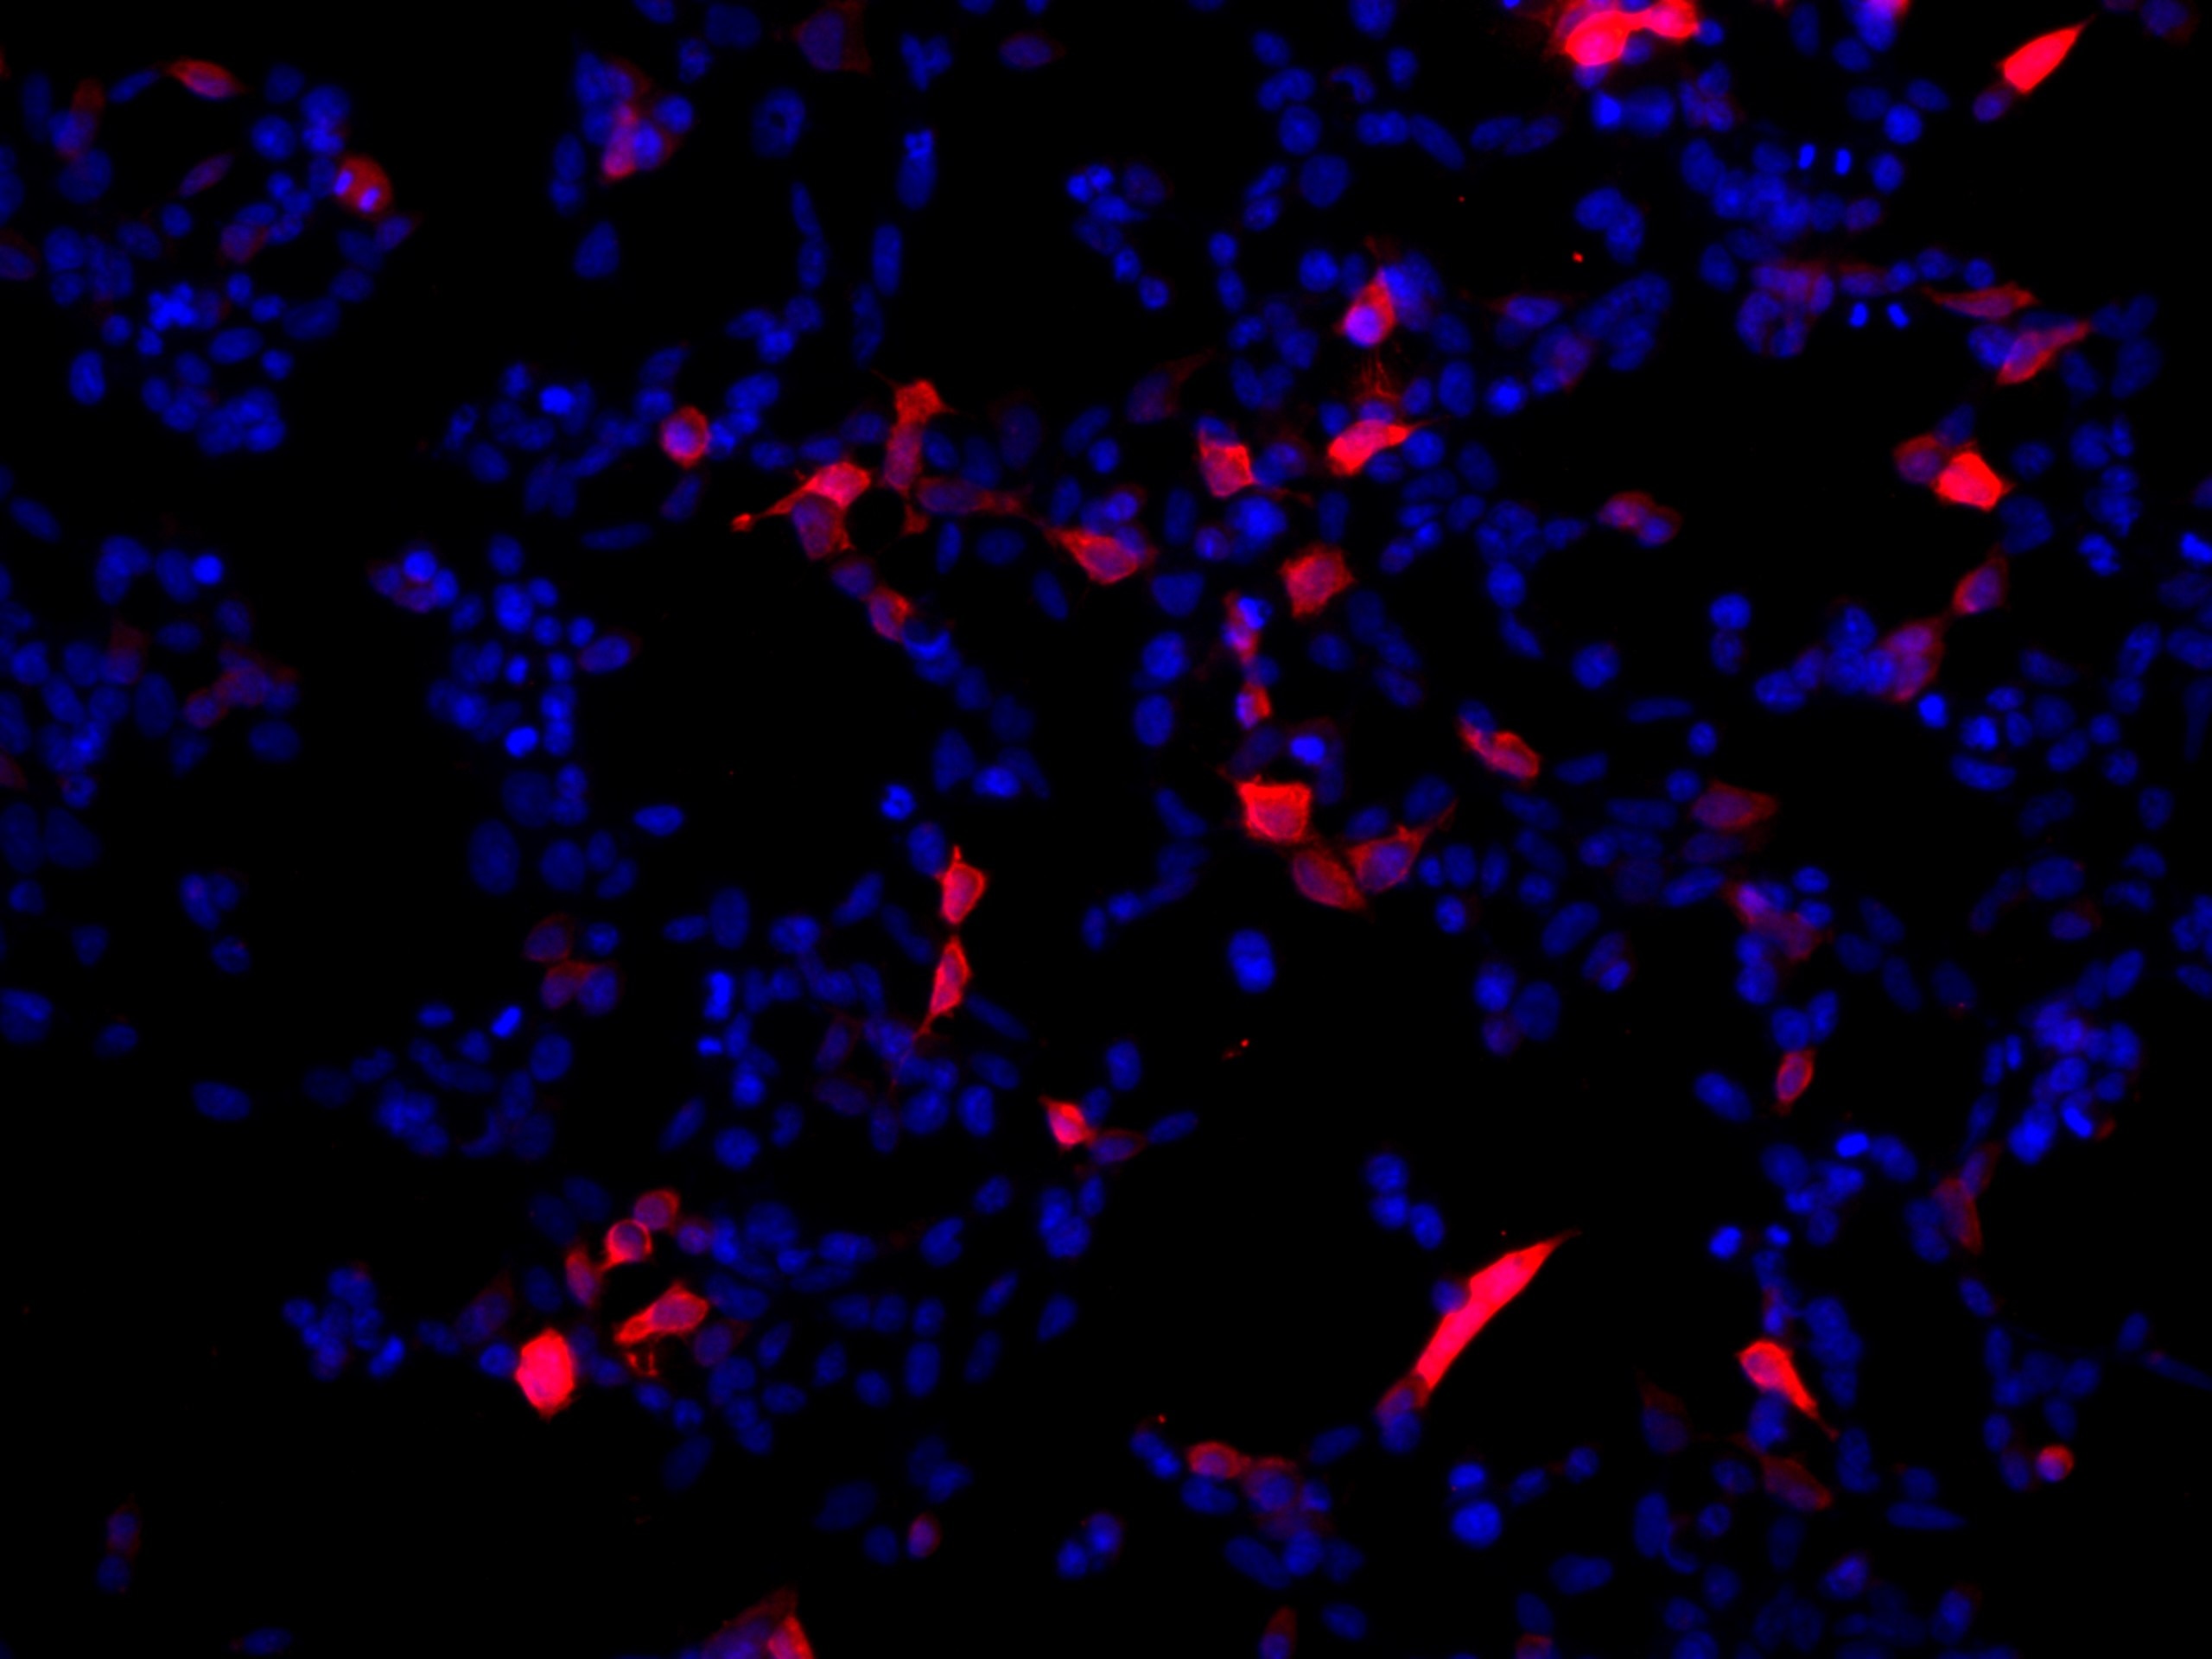 Immunofluorescence (IF) / fluorescent staining of Transfected HEK-293 cells using DYKDDDDK tag Recombinant antibody (Binds to FLAG®  (80010-1-RR)